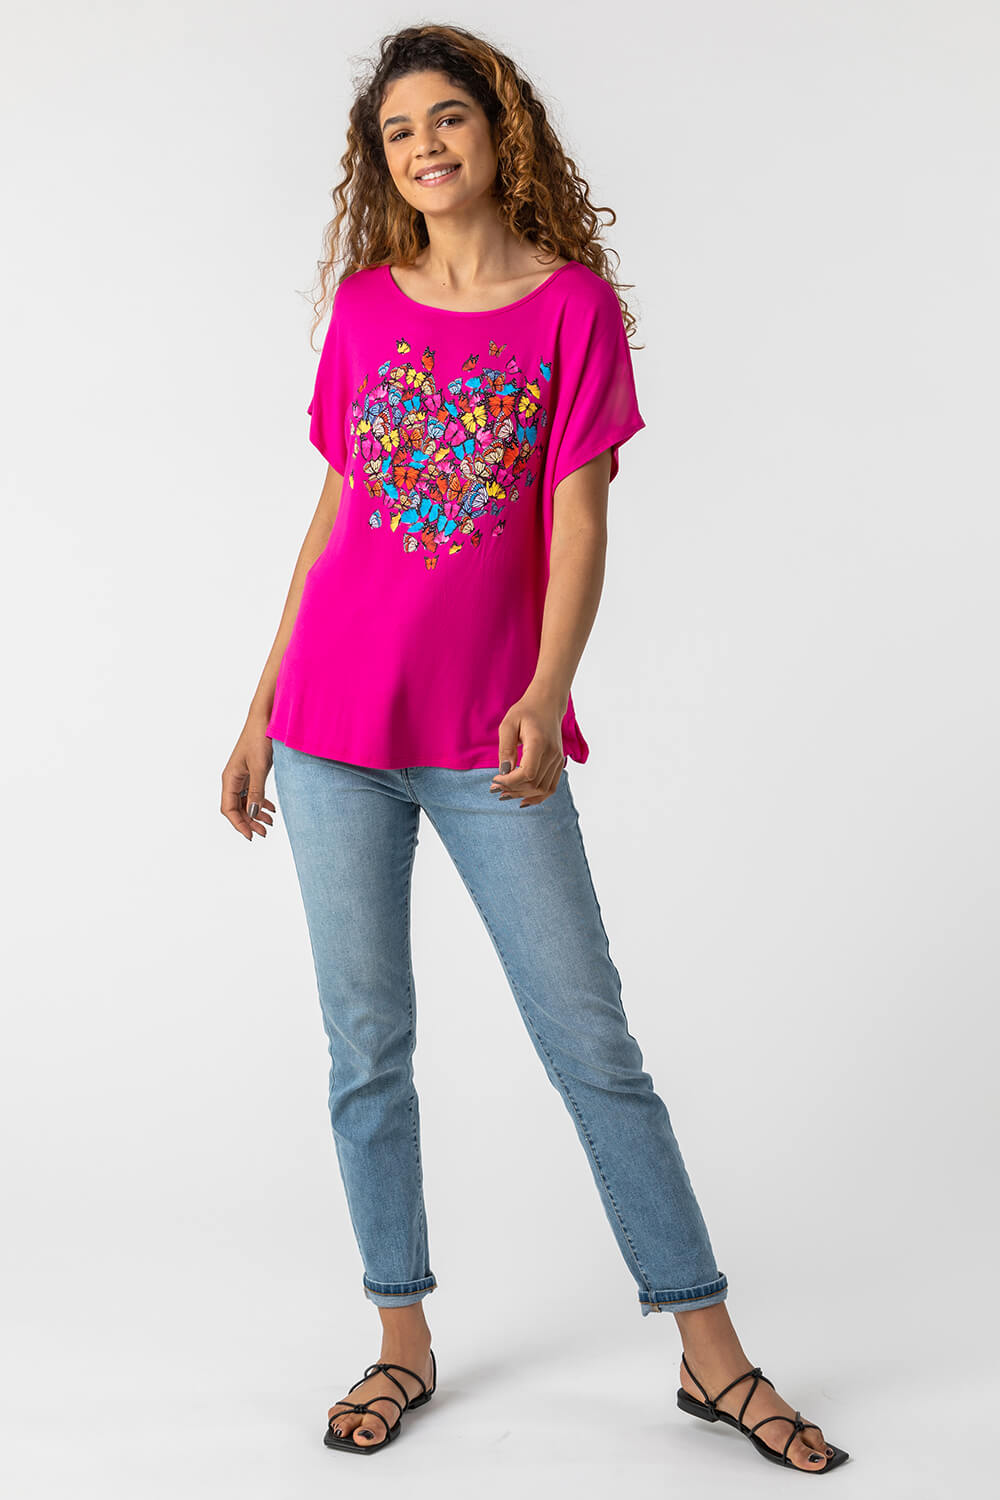 PINK Butterfly Heart Print T-Shirt, Image 3 of 5